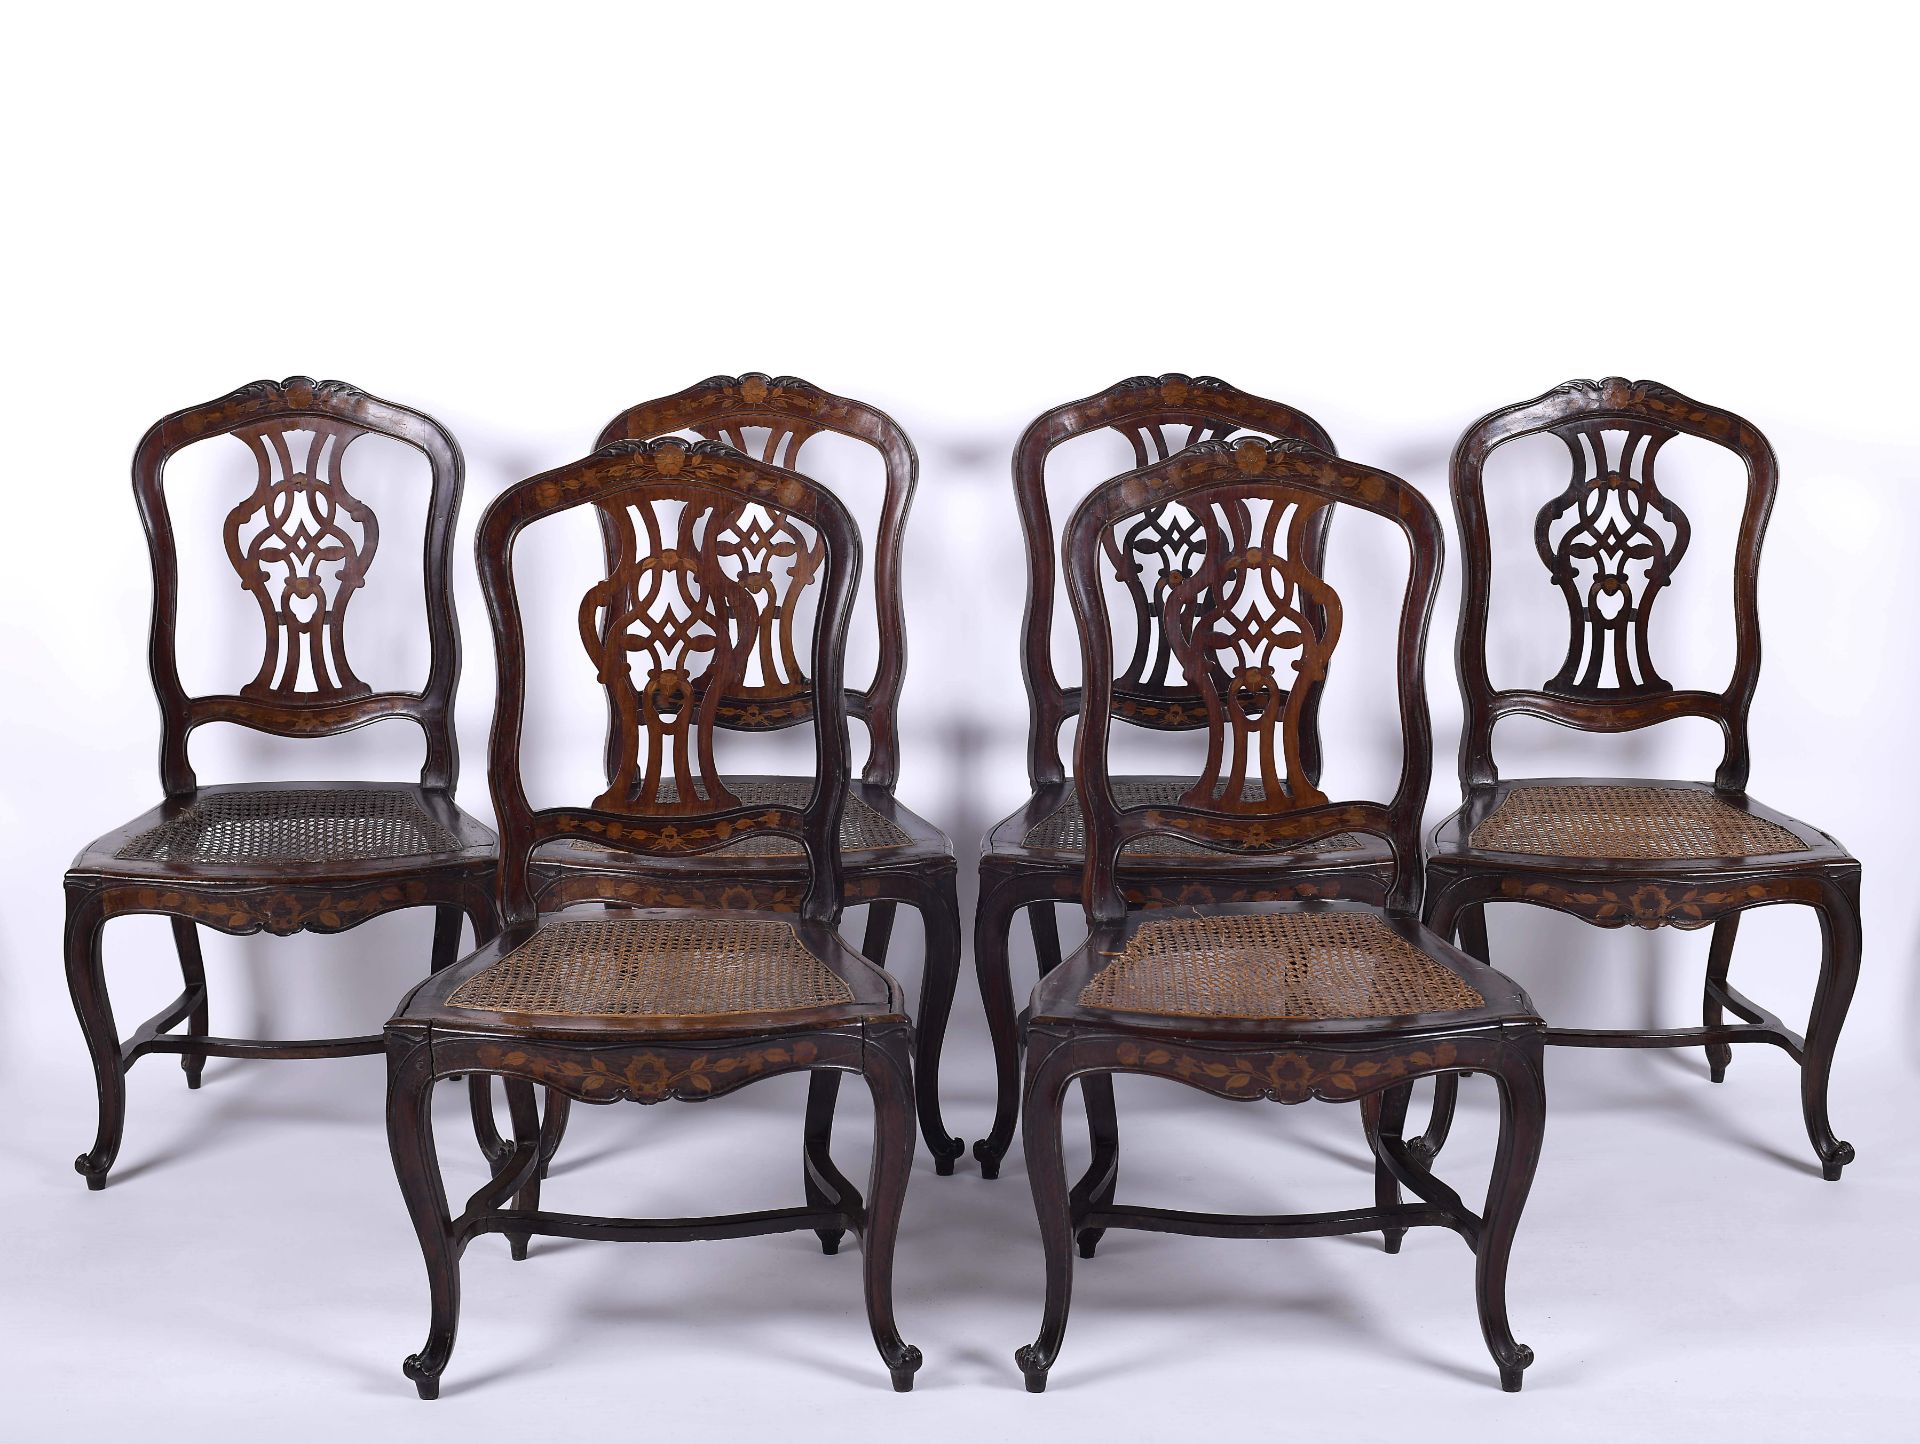 A set of twelve chairs